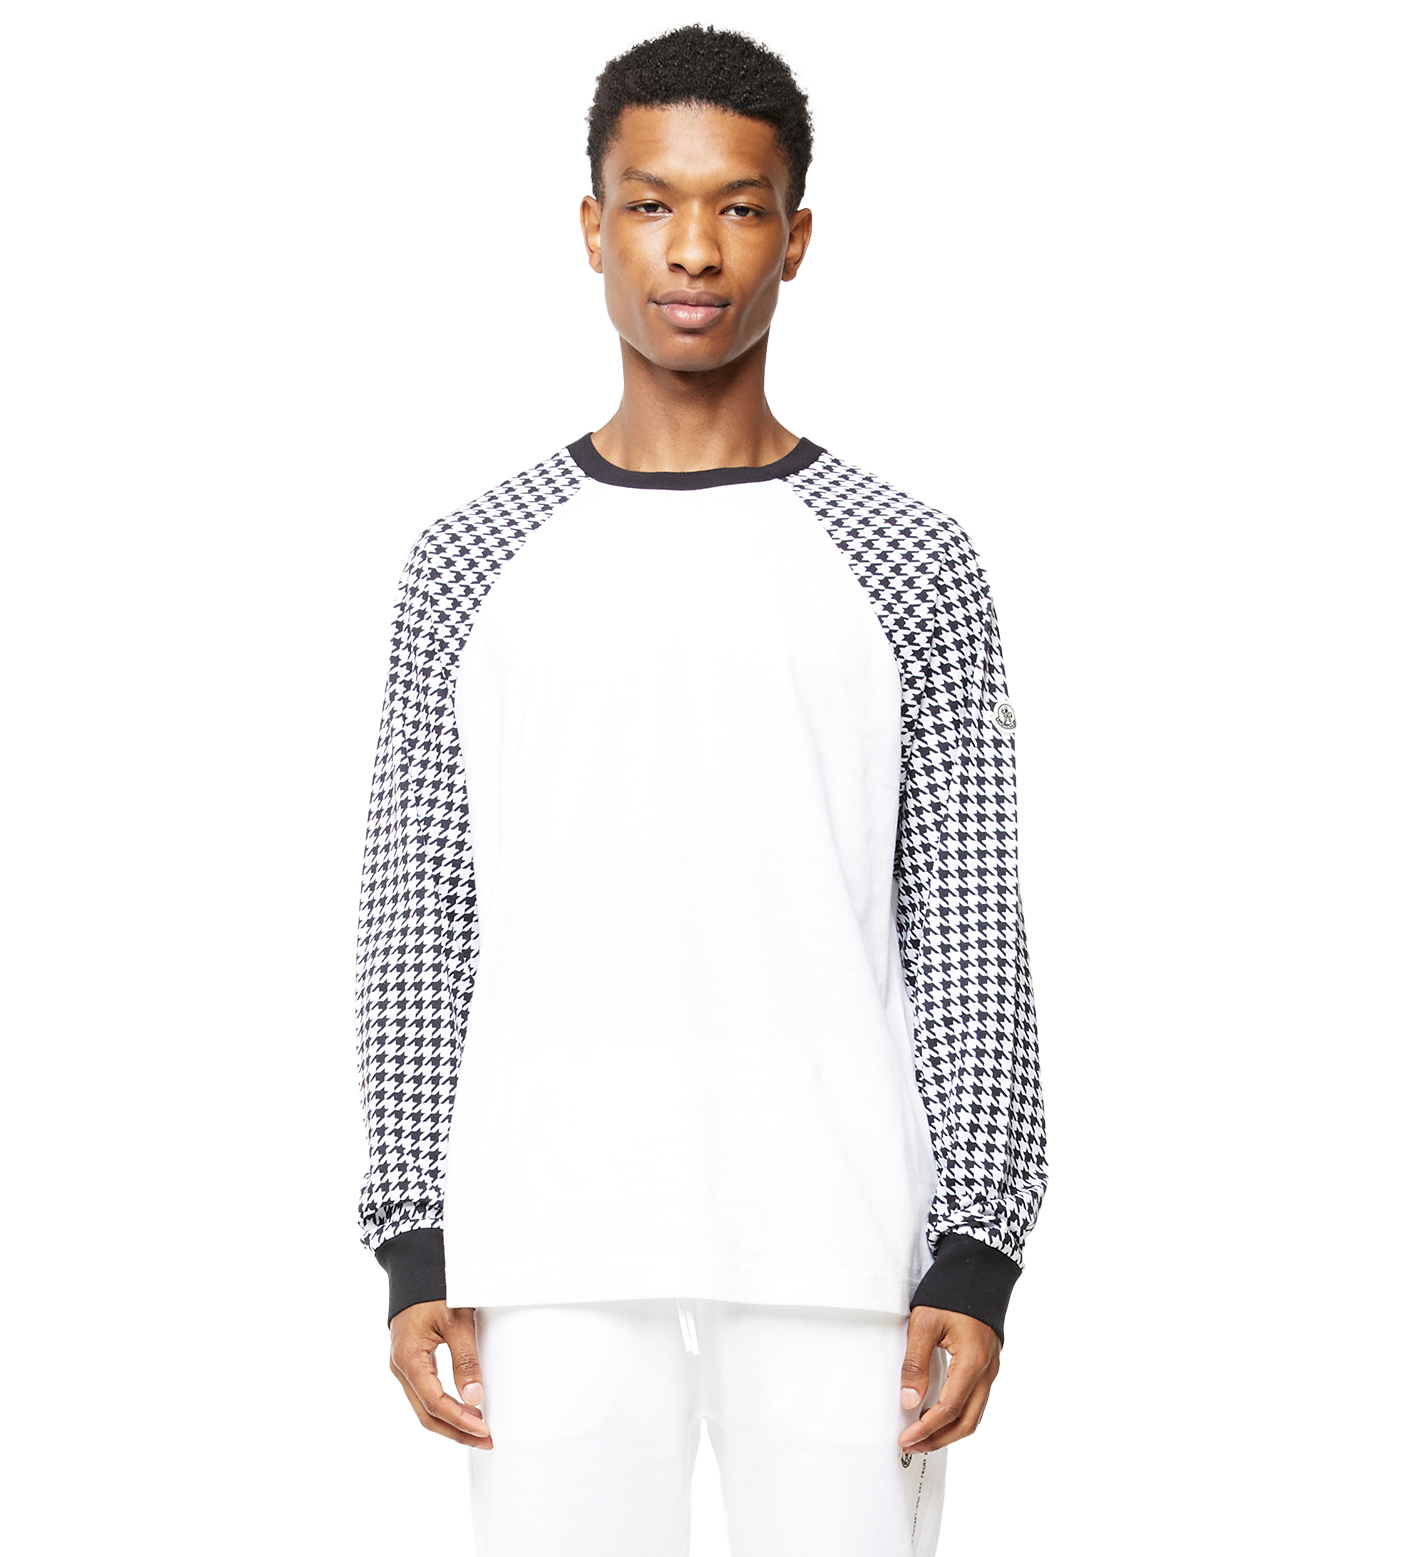 Houndstooth Long Sleeve T-Shirt